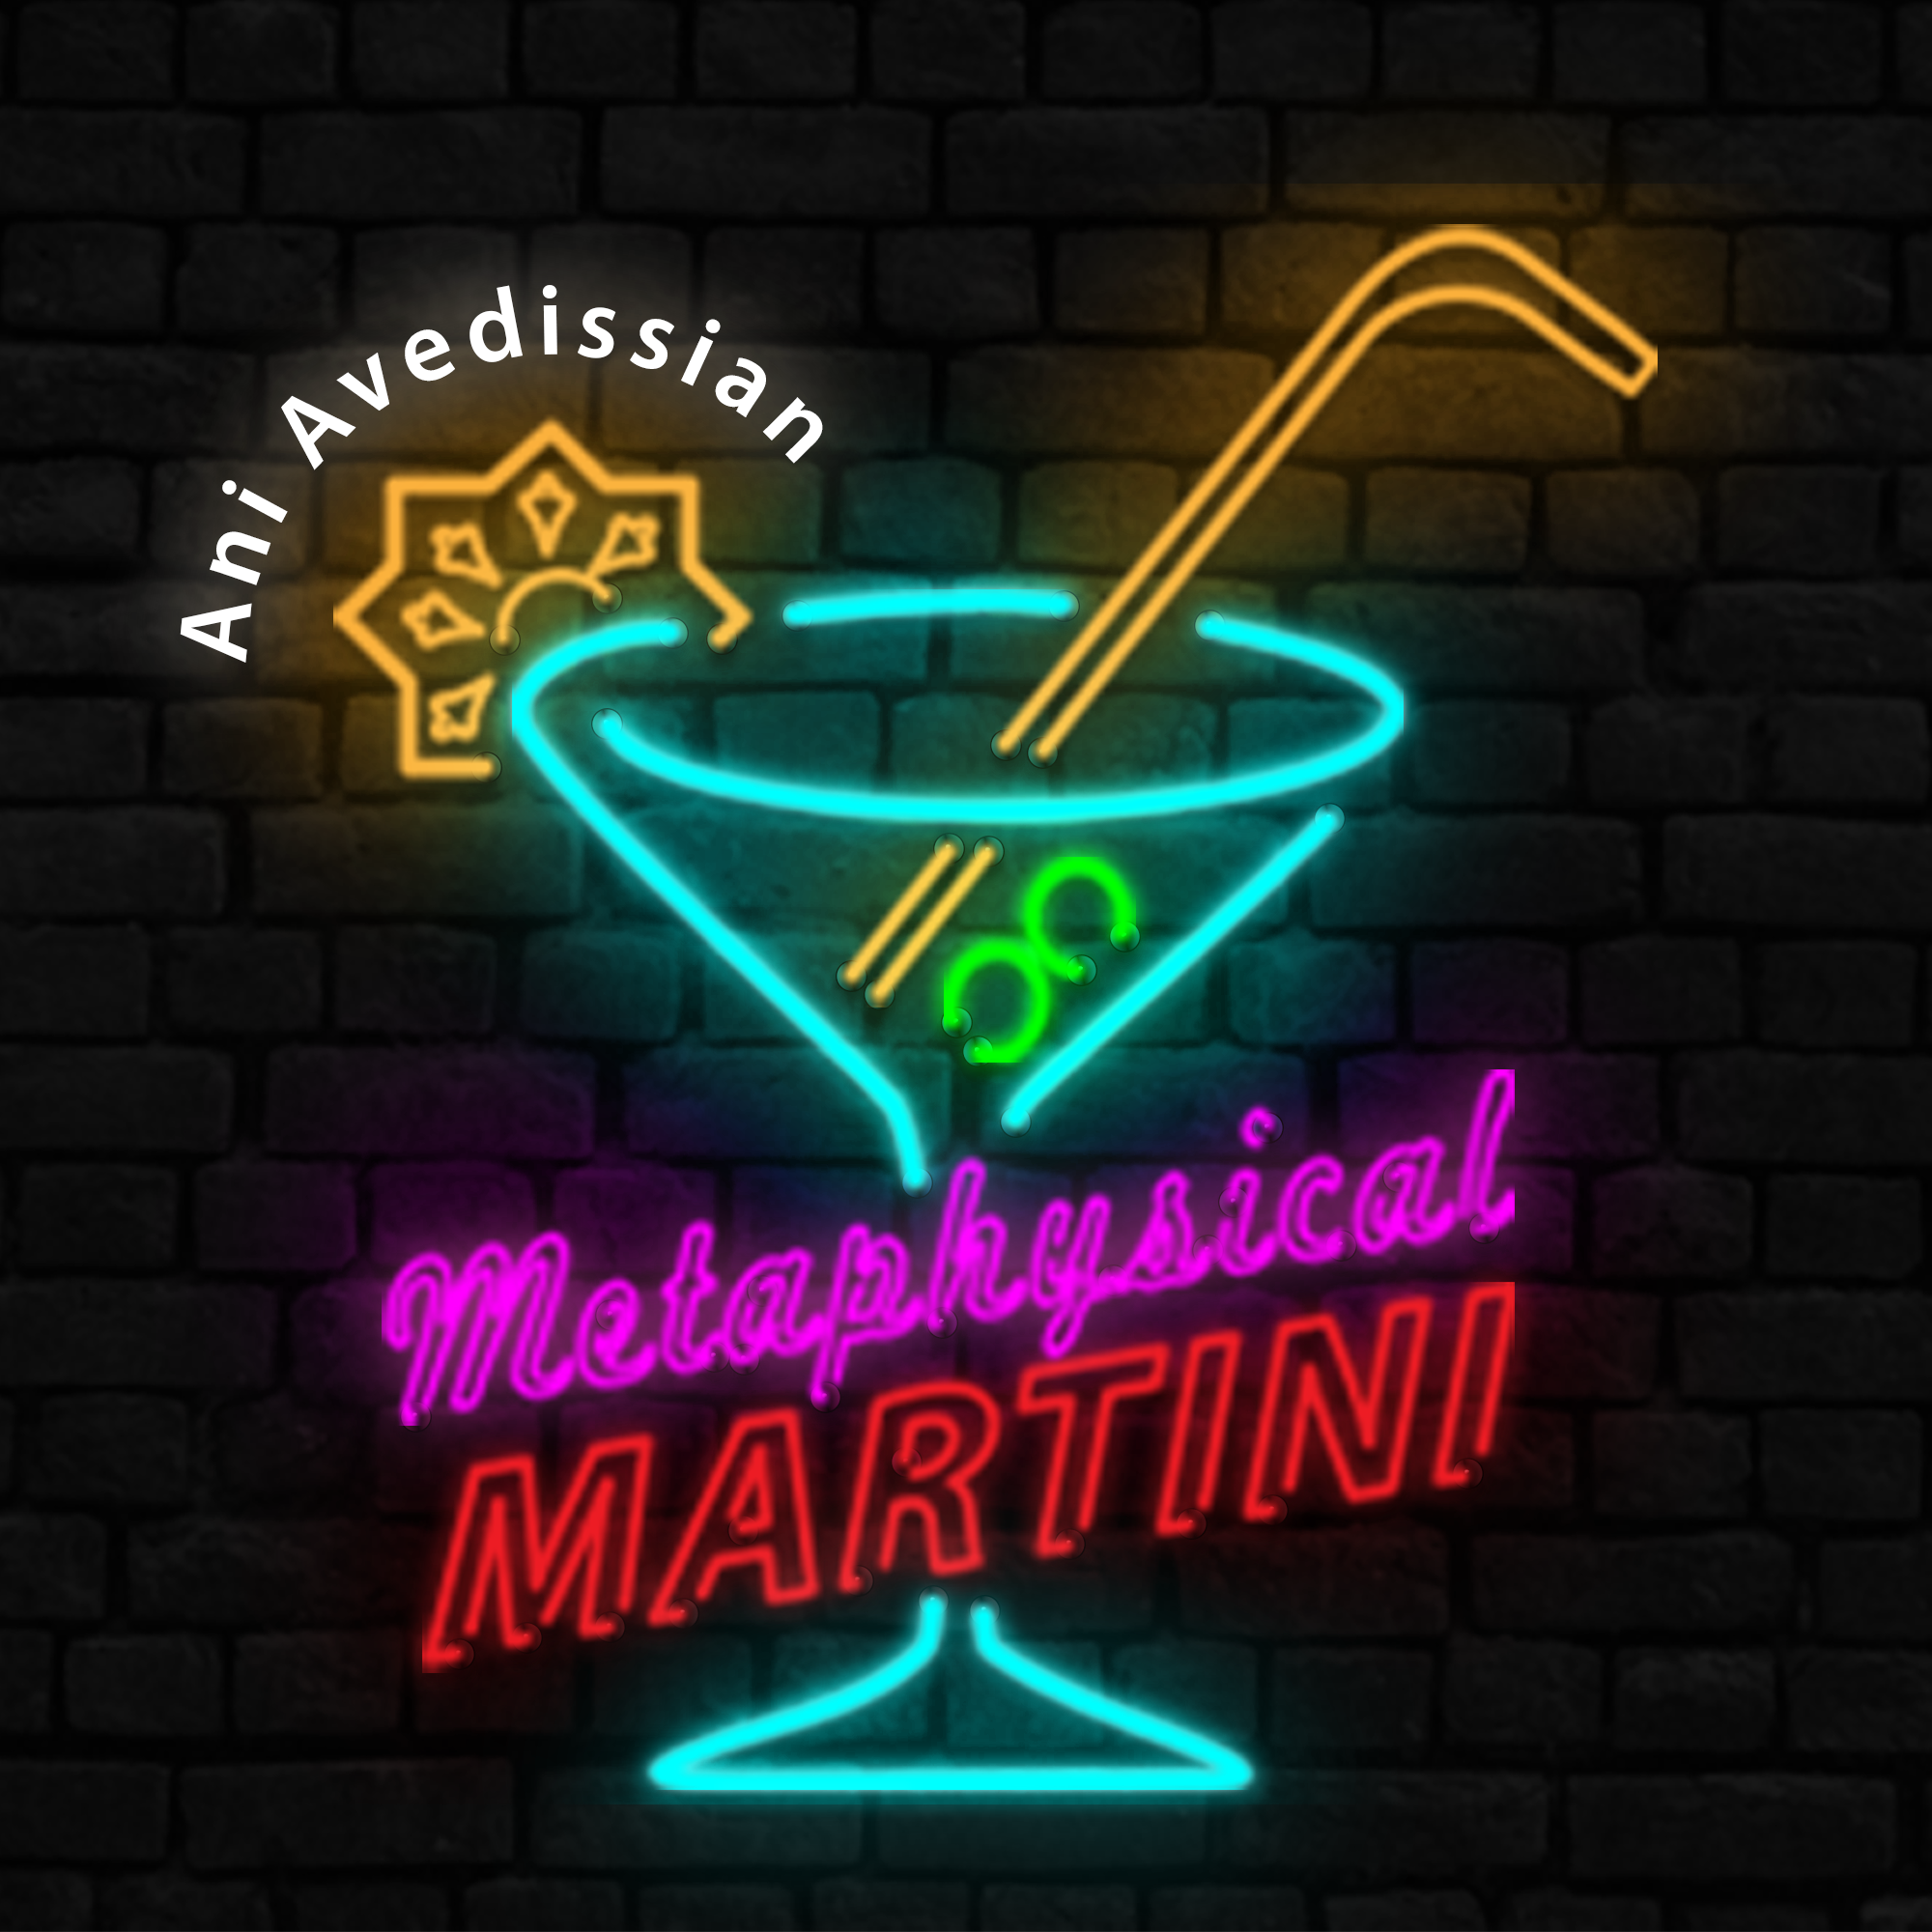 "Metaphysical Martini" 02/03/2021 Ten tips for overcoming tyranny of the soul!